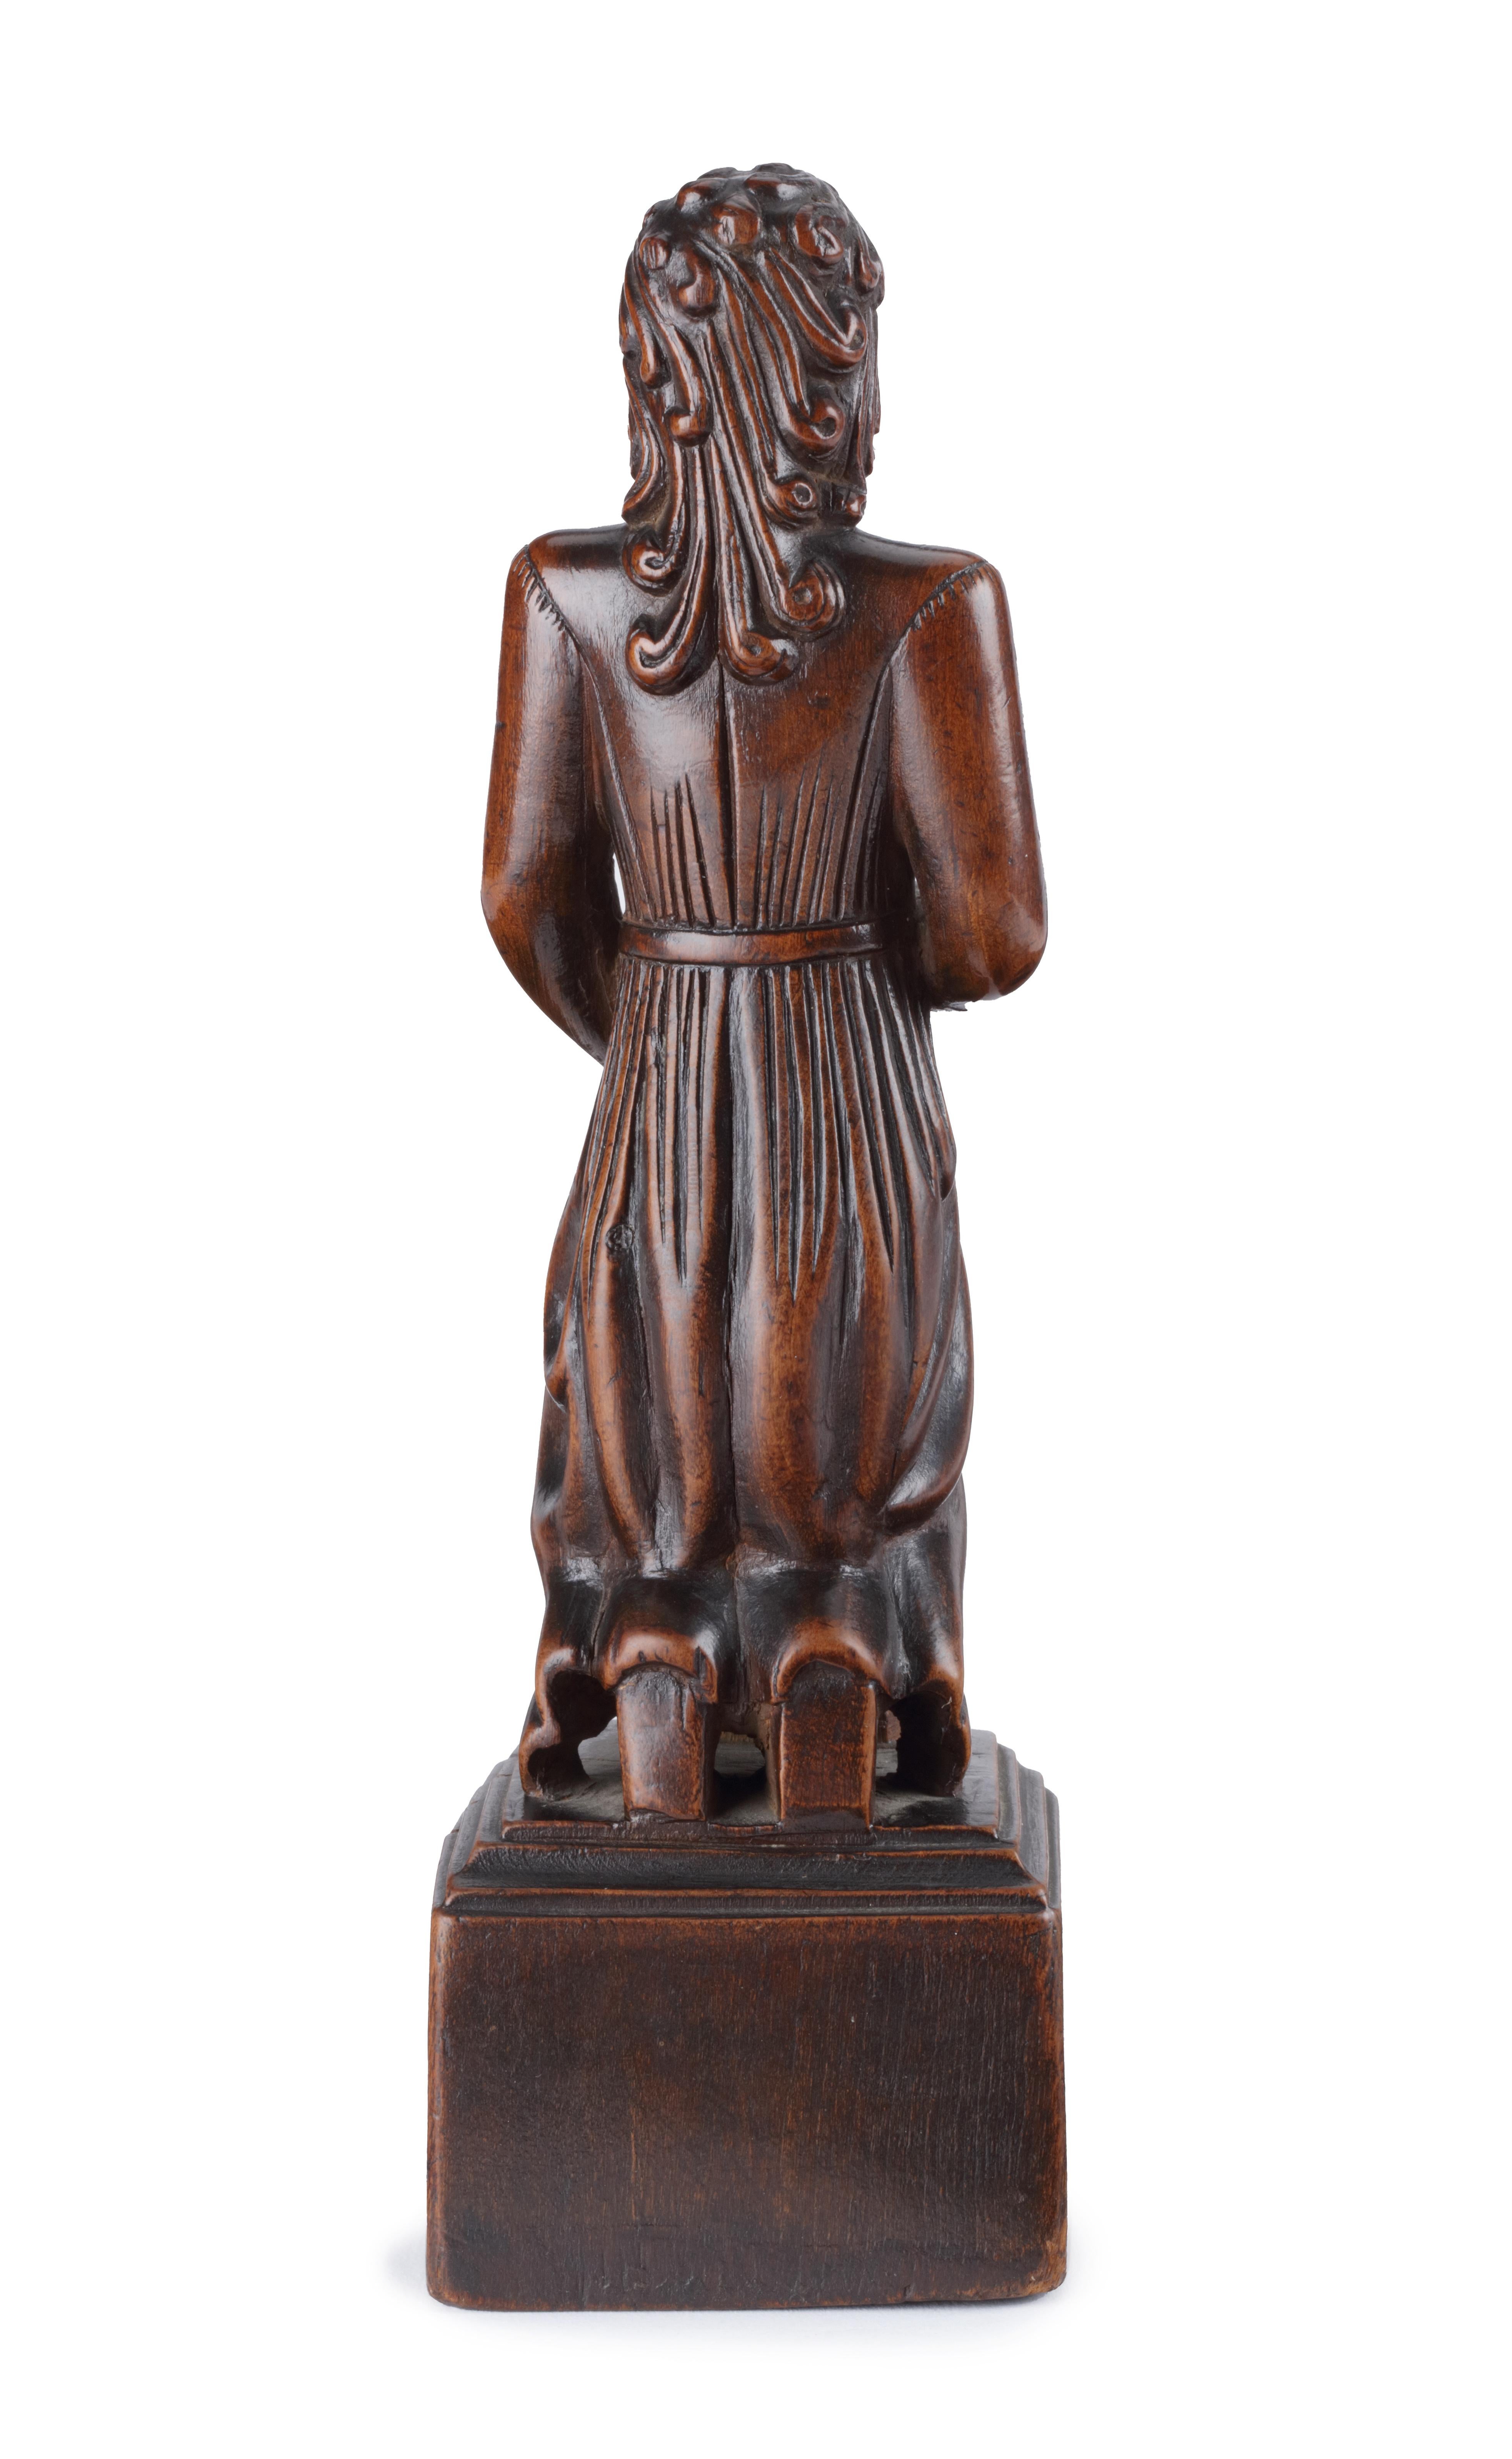 An early Chinese wood sculpture of a Portuguese or Spanish Jesuit

Possibly Macao, 17th-early 18th century, indistinctly inscribed at the front of the base

Measure: H 22.6 cm

The figure, carved in East-Asian walnut with a deep-brown aged